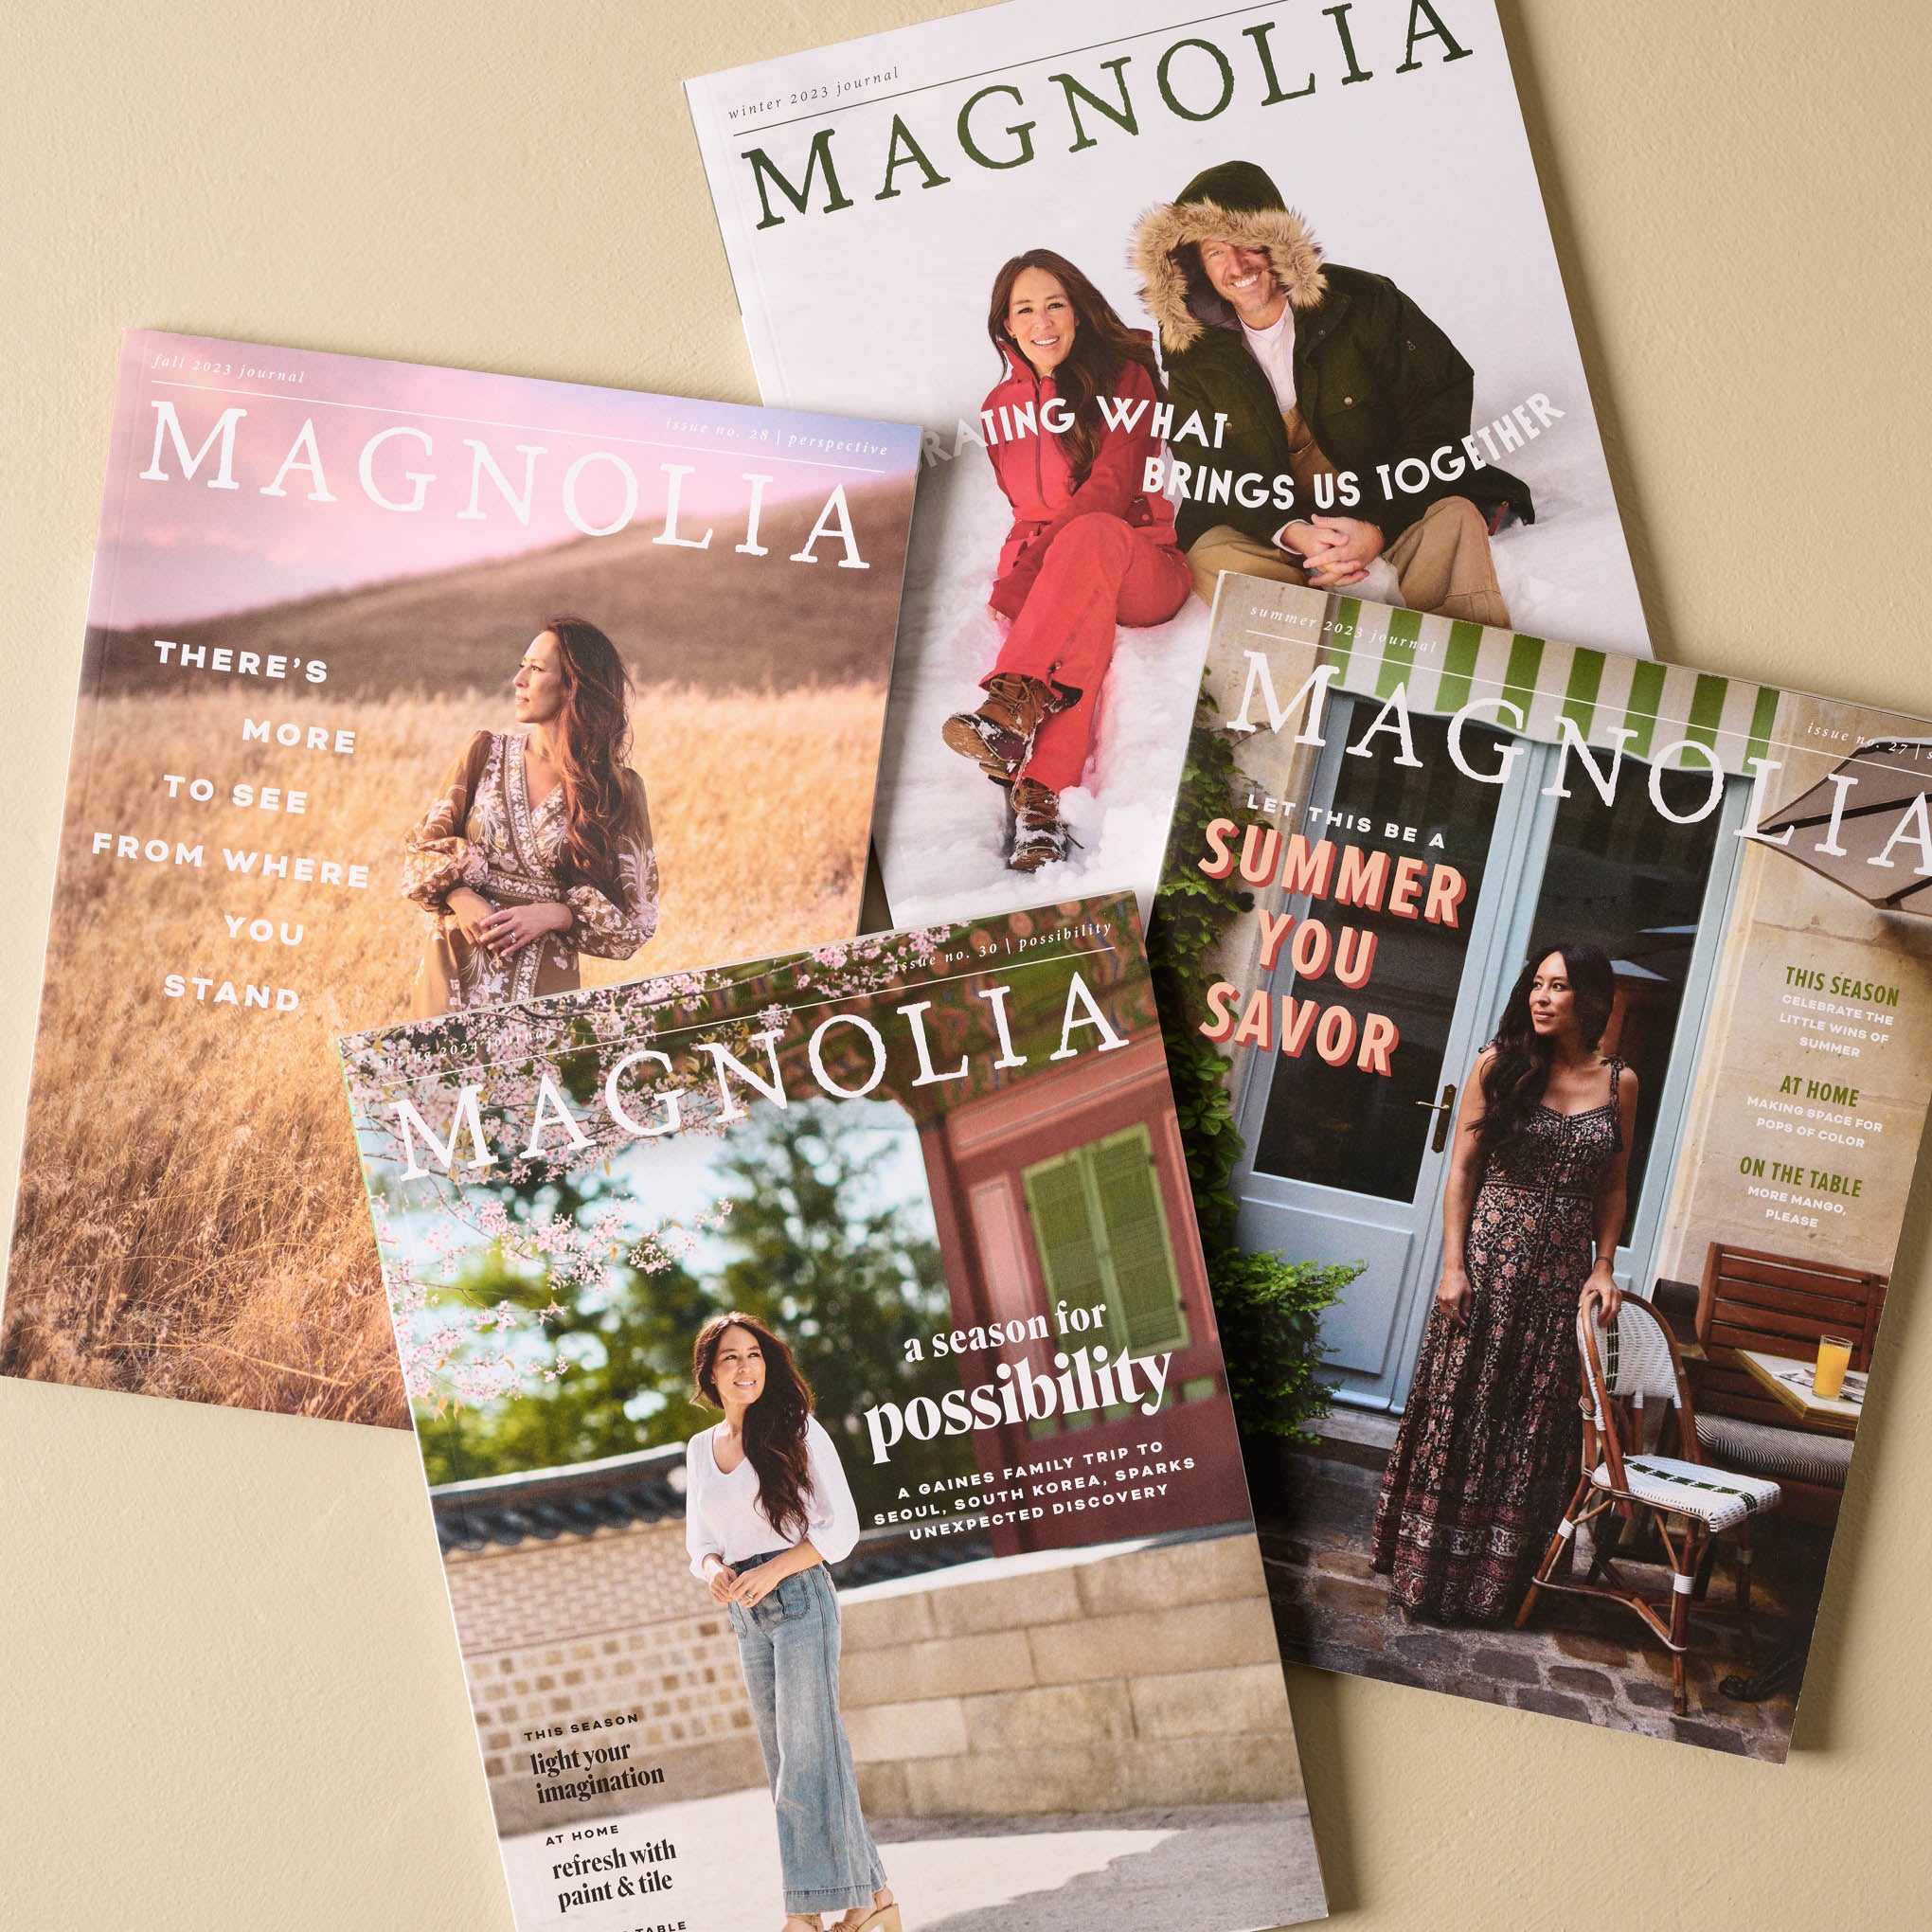 magnolia journal subscription incudes the spring, summer, fall and winter issues